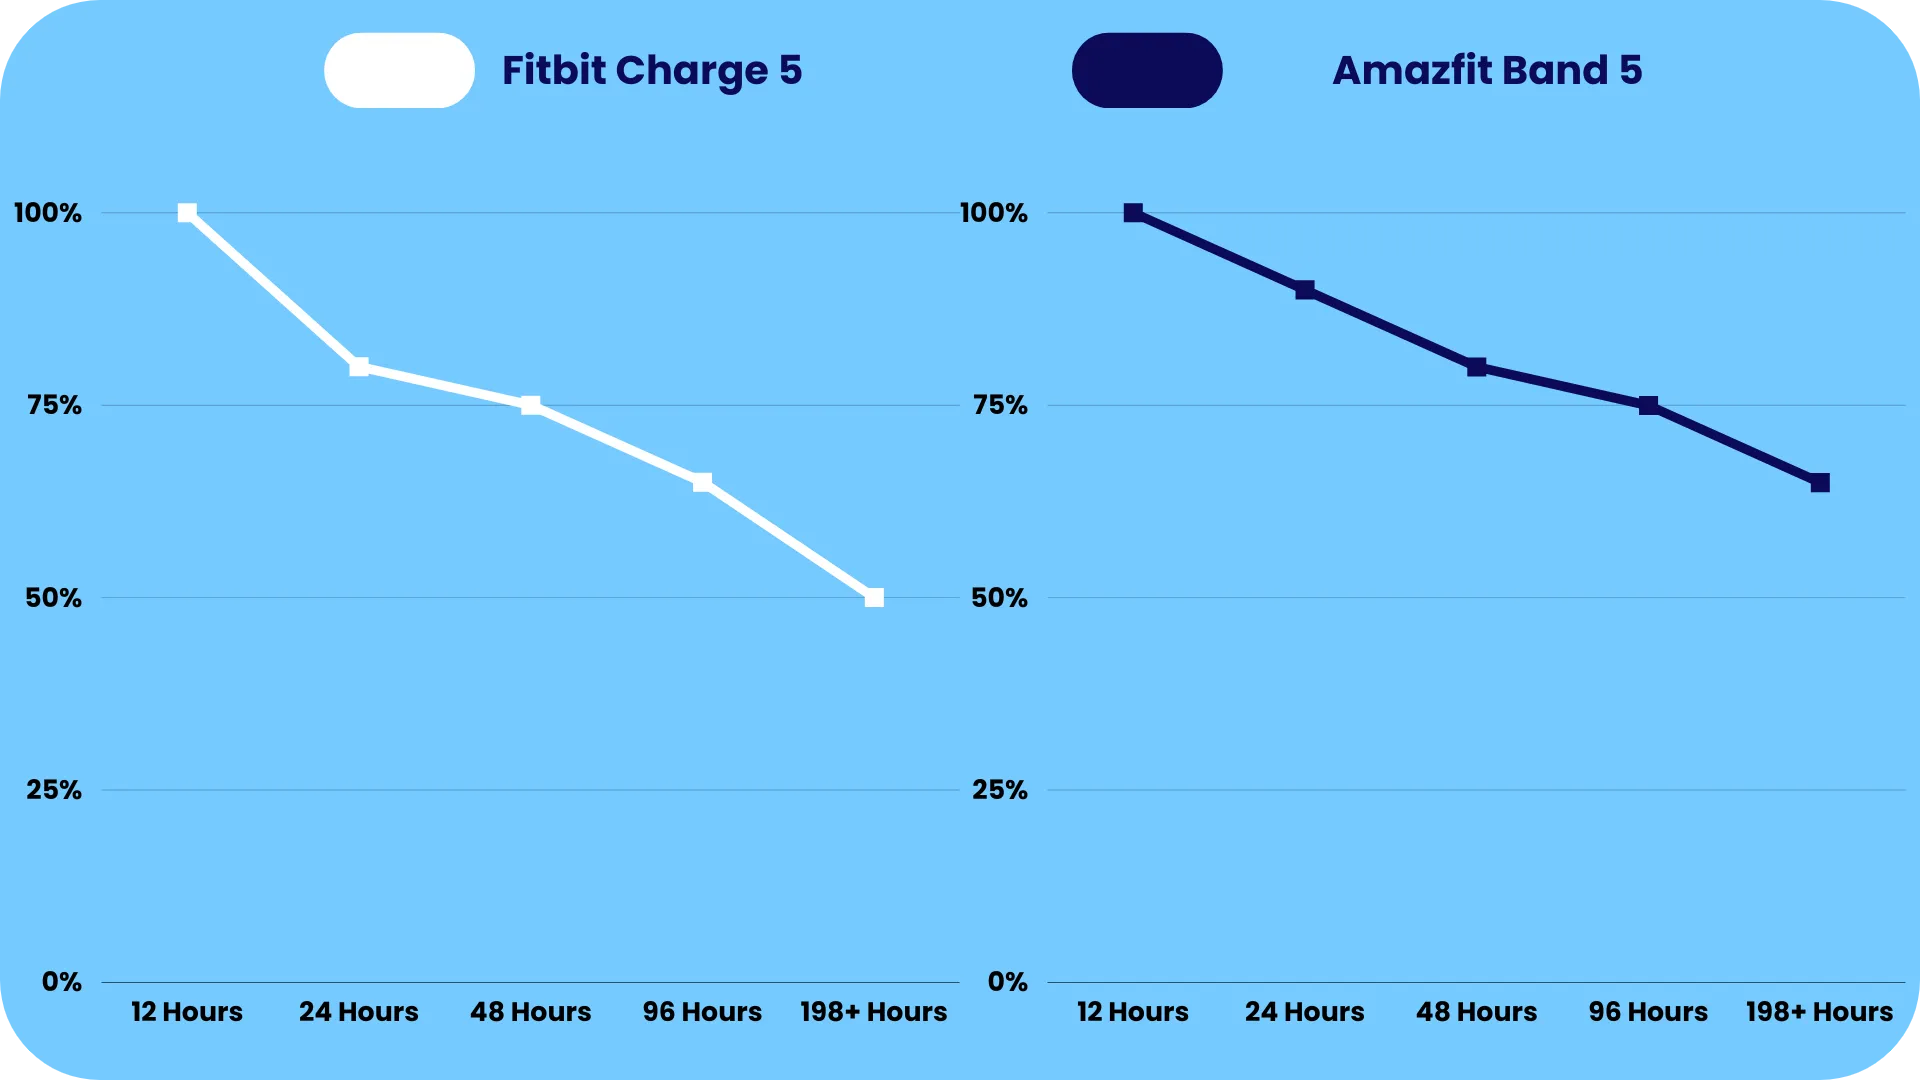 Lifespan Comparison of Fitbit Charge 5 & Amazfit Band 5